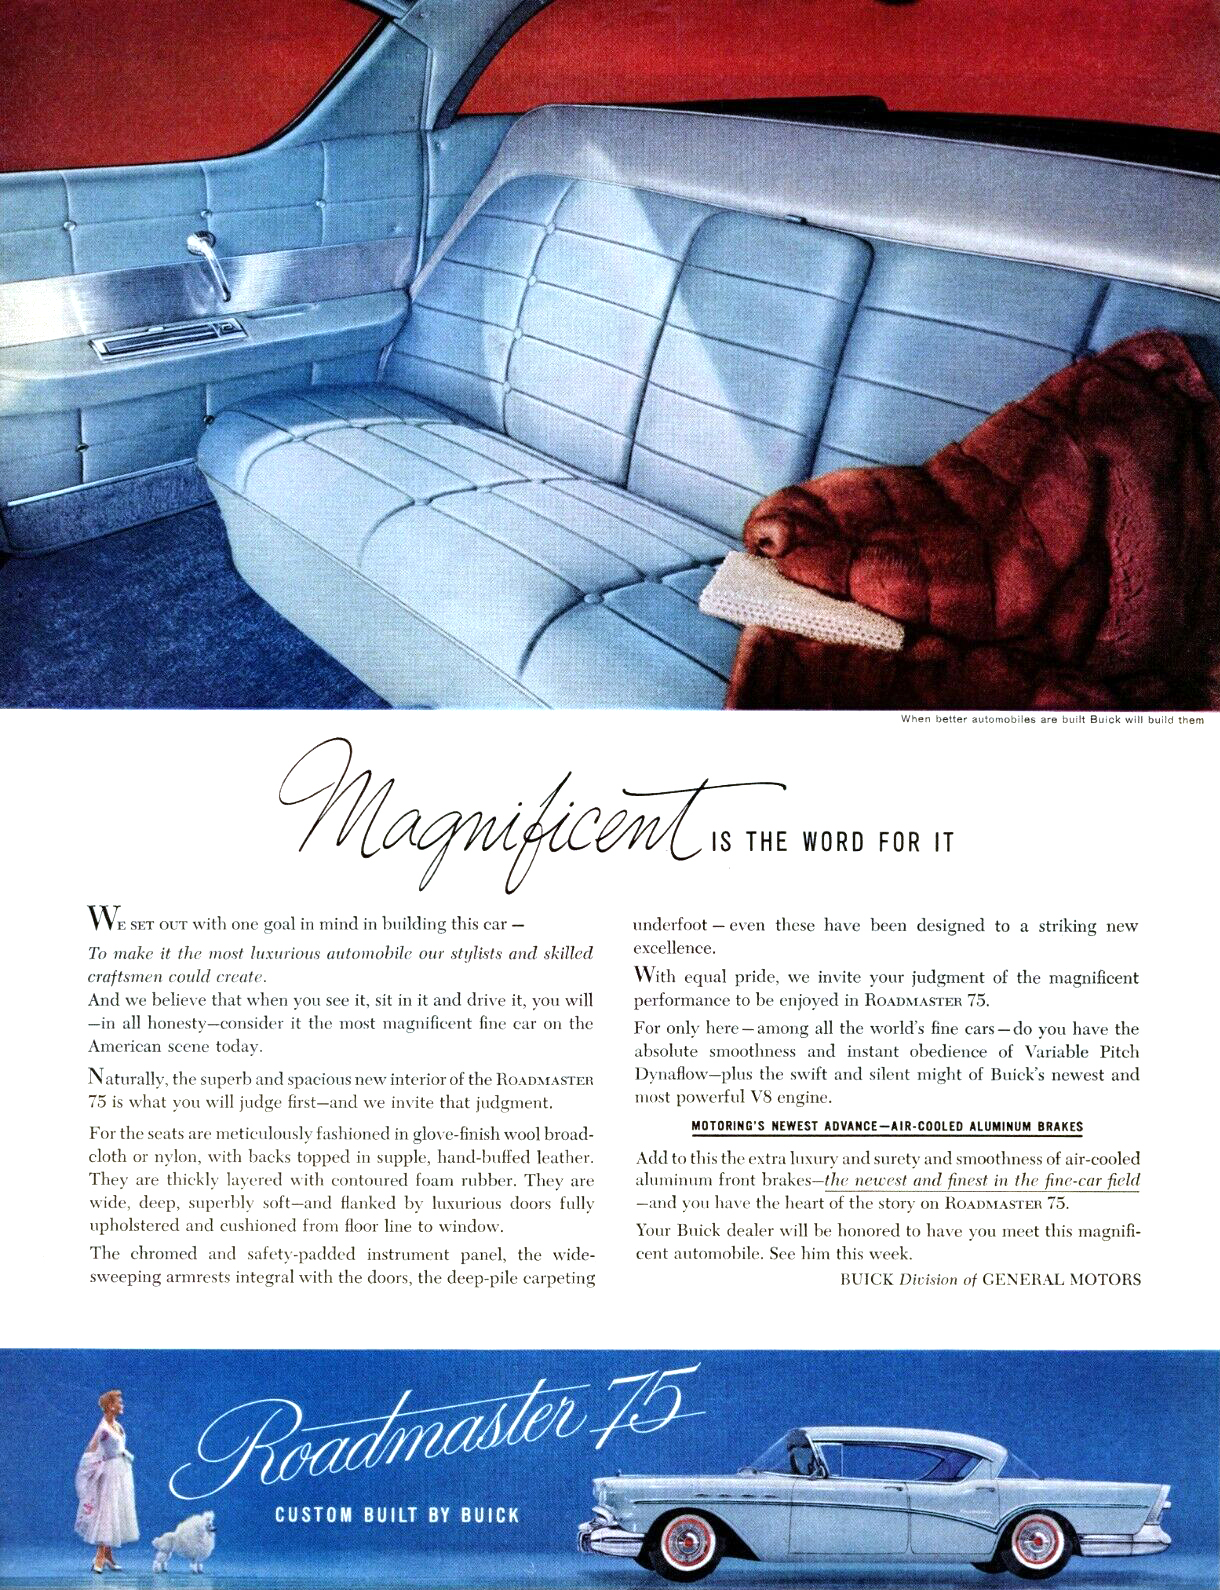 Buick Roadmaster 75 Ad (May, 1957) – Magnificent is the word for it